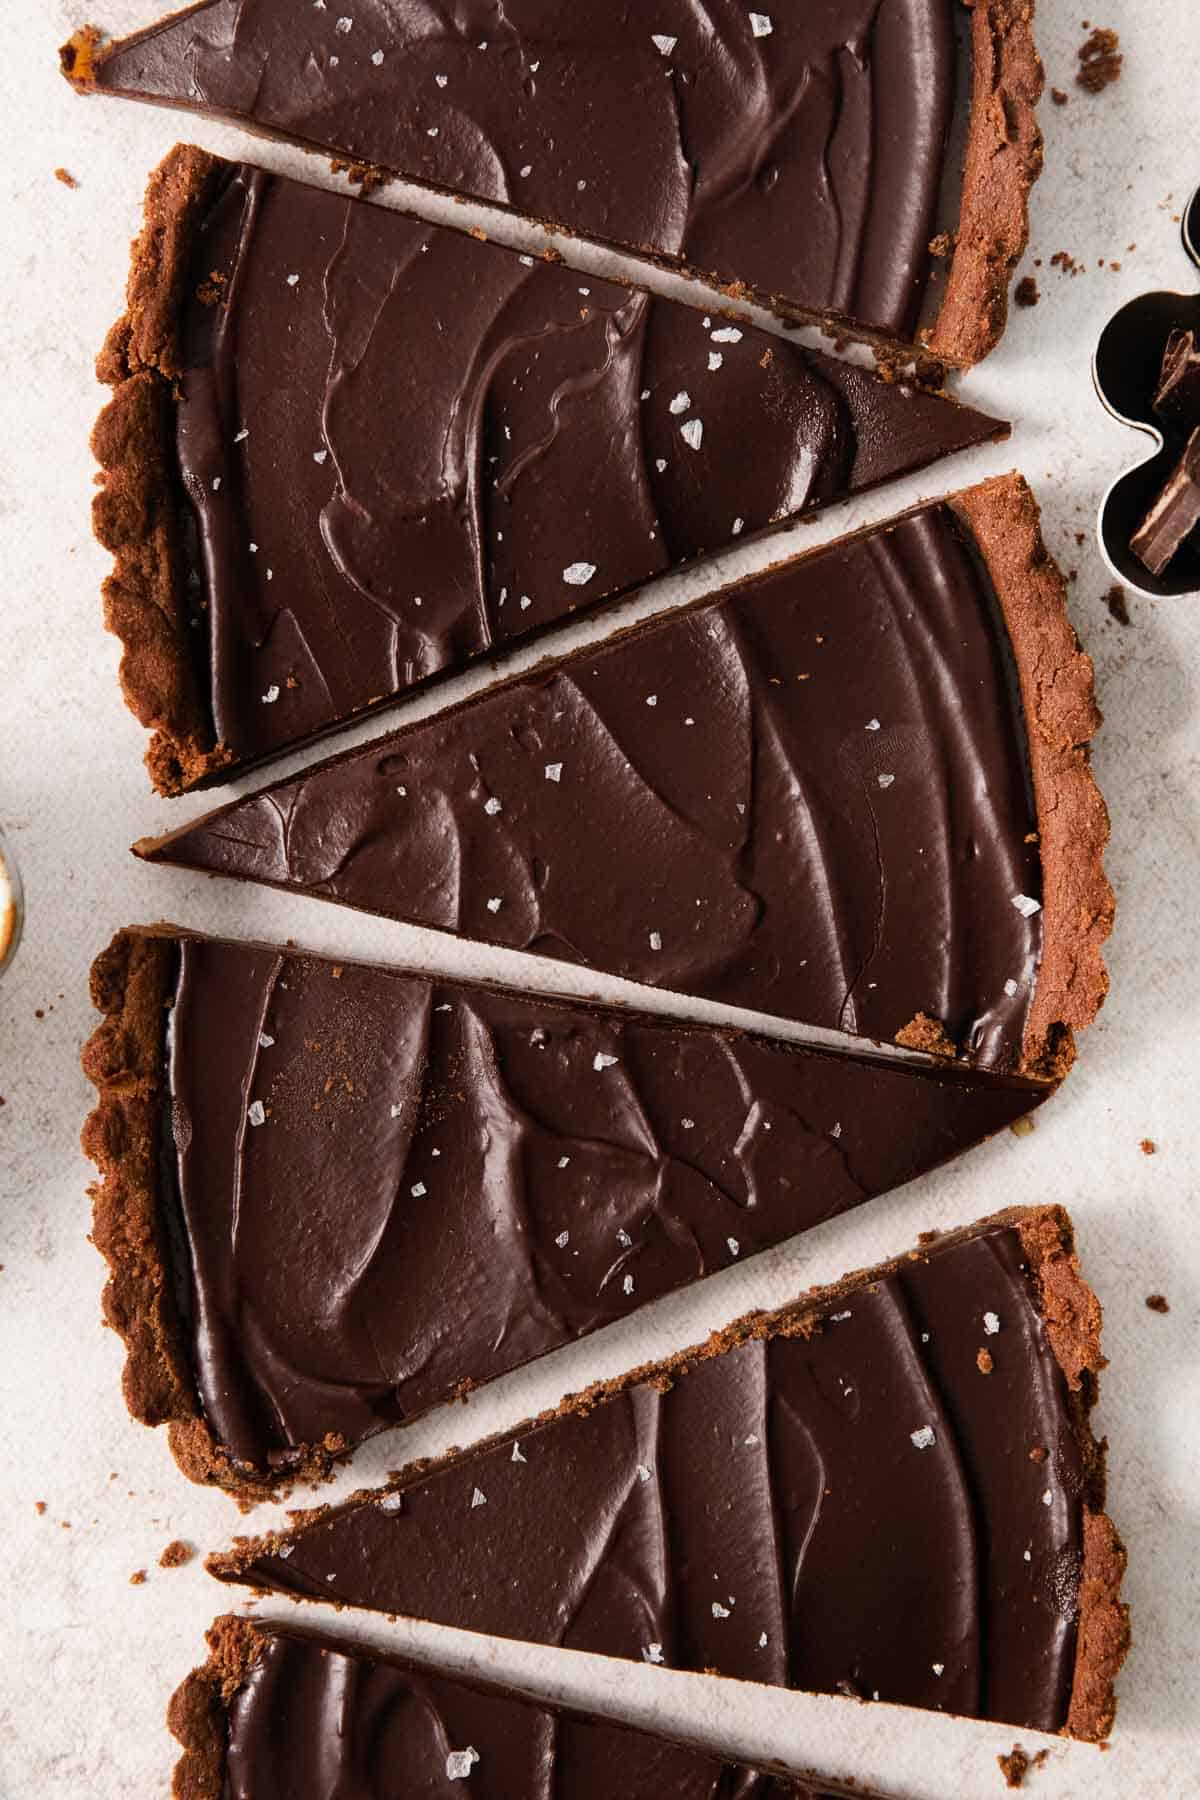 slices of gluten-free chocolate caramel tart lined up in a row on a countertop